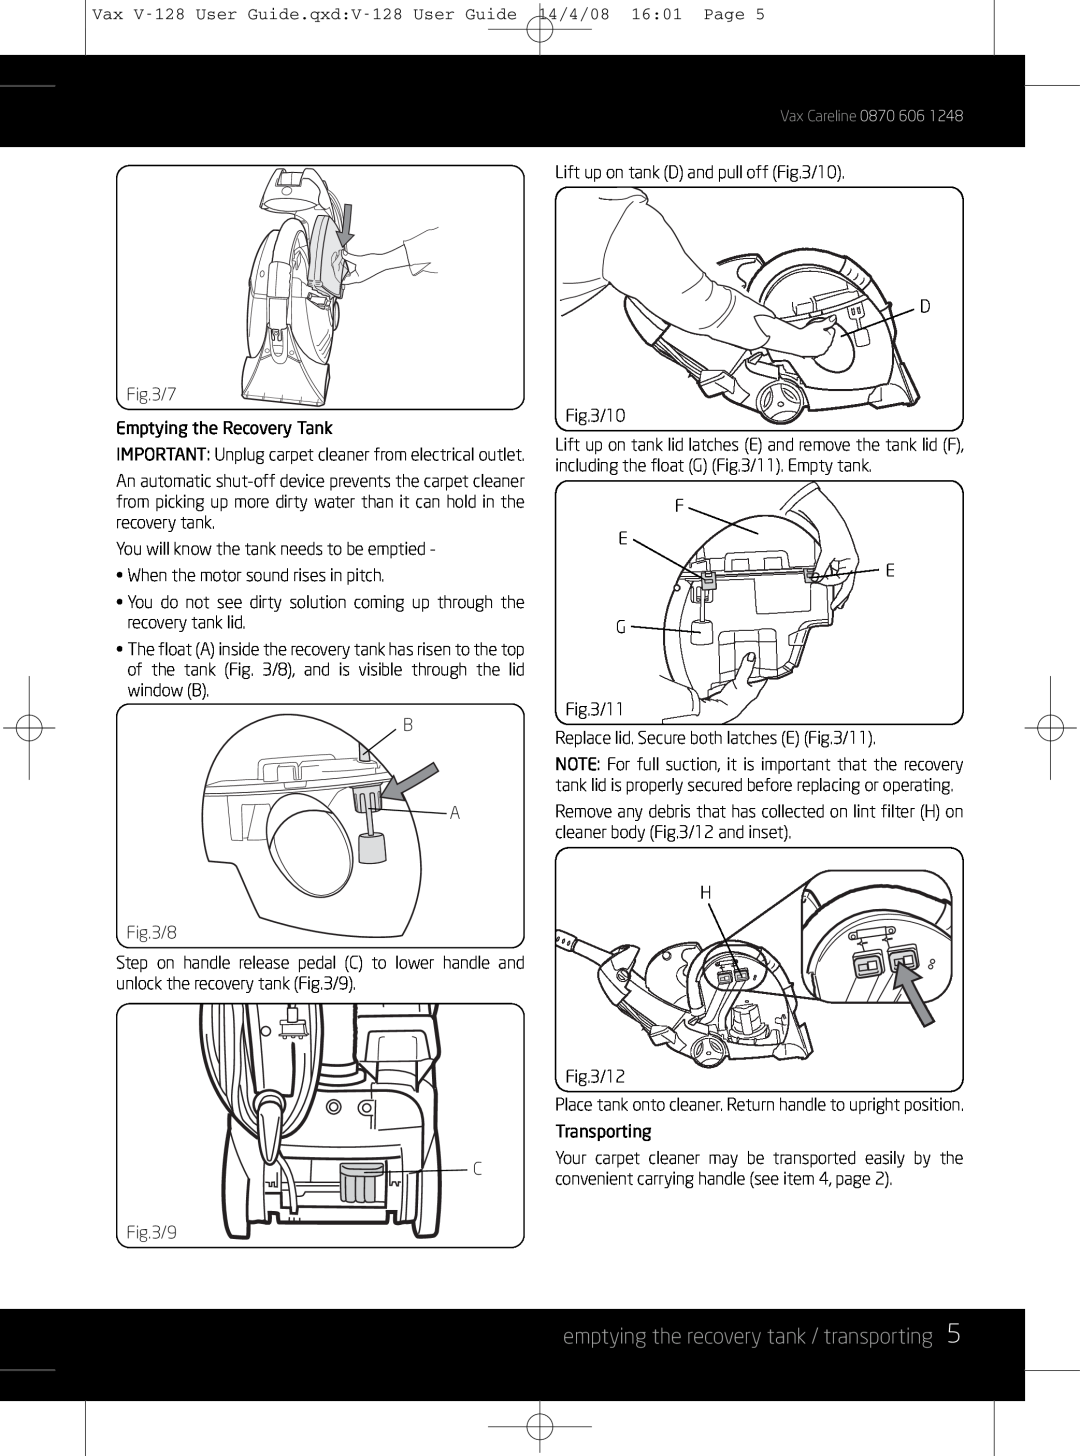 Vizio V-128 instruction manual emptying the recovery tank / transporting 